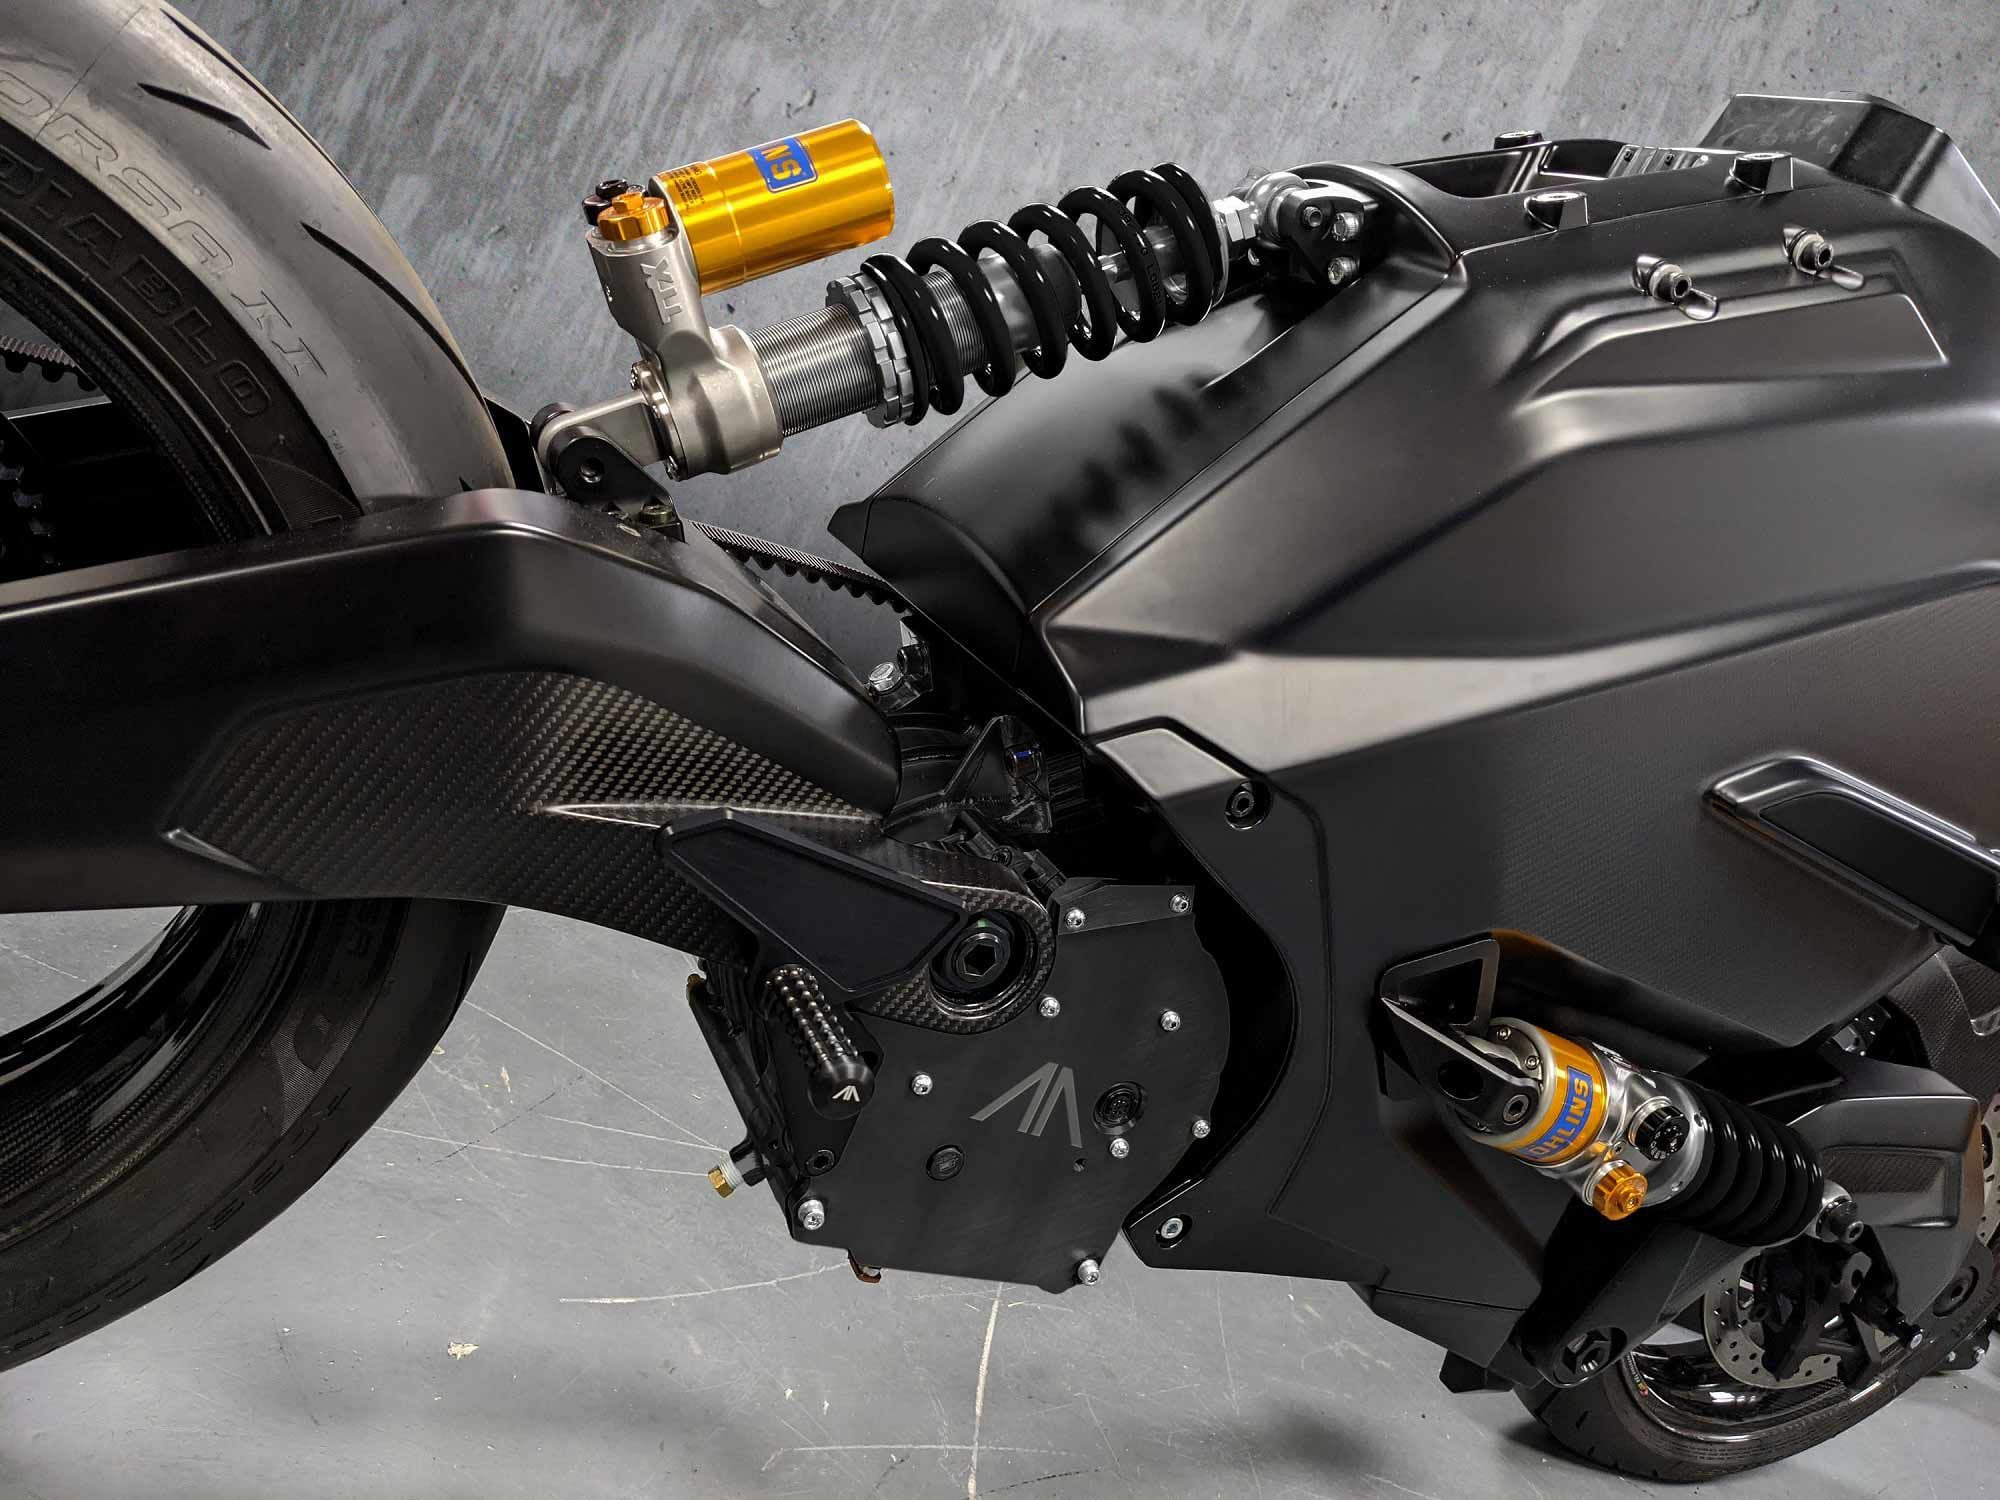 An Öhlins rear shock bolts to the battery module and acts directly against the monocoque chassis.